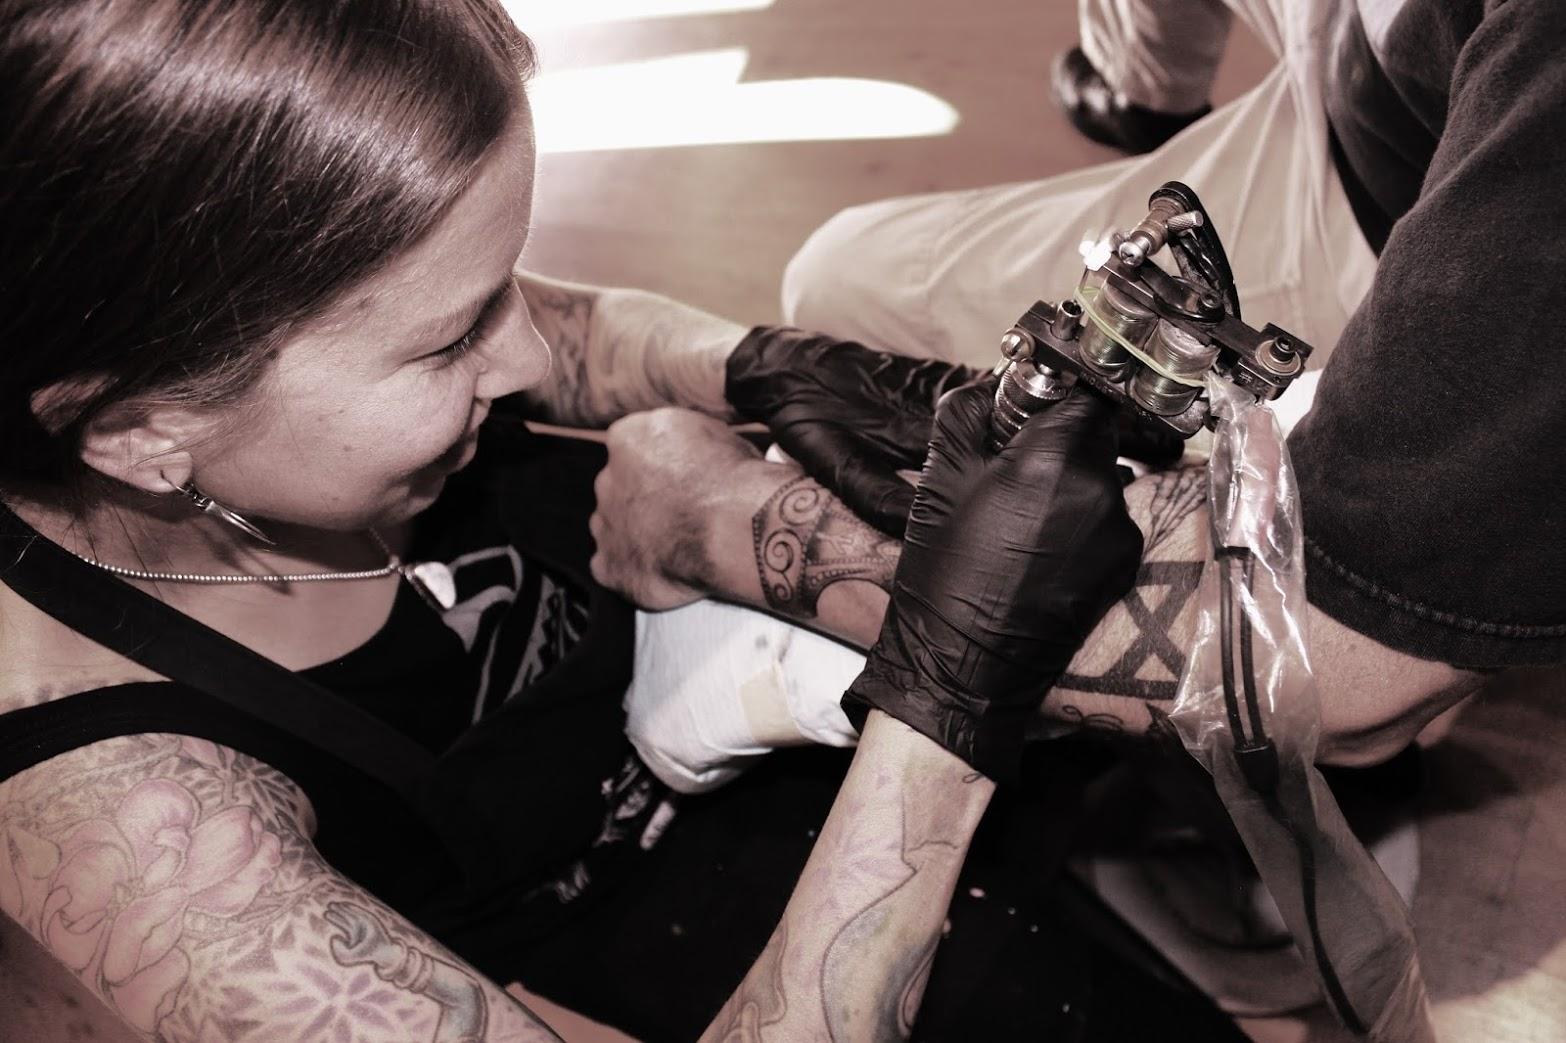 plus.google.comA man gets a tattoo on his arm by Valkyrie Tattoo artist Jennifer Untalan, who spoke at the recent event "Sonoma Ink." A discussion took place during the event, held by Untalan and two other key note speakers, of the taboo and culture…